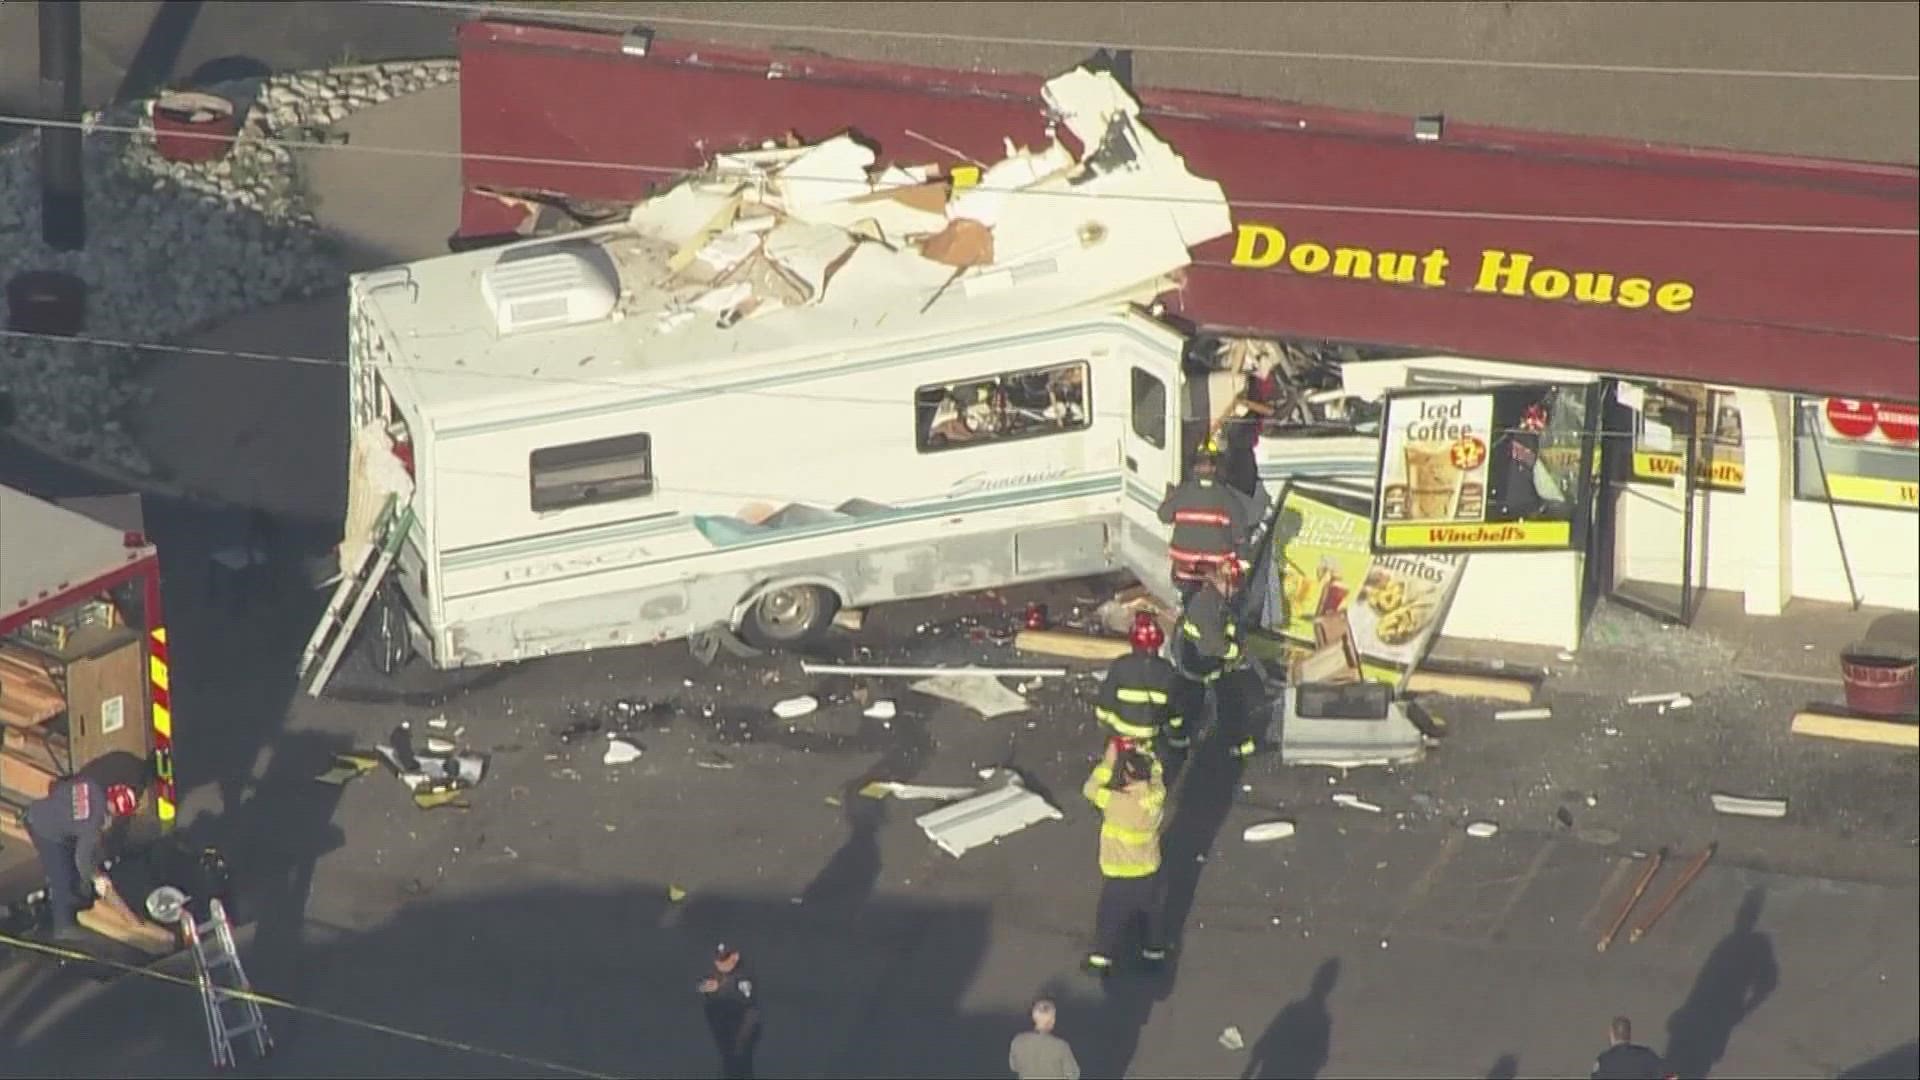 SKY9 is over the scene of an RV that crashed into the side of a Winchell’s Donut House near Colfax Avenue and Pierce Street.